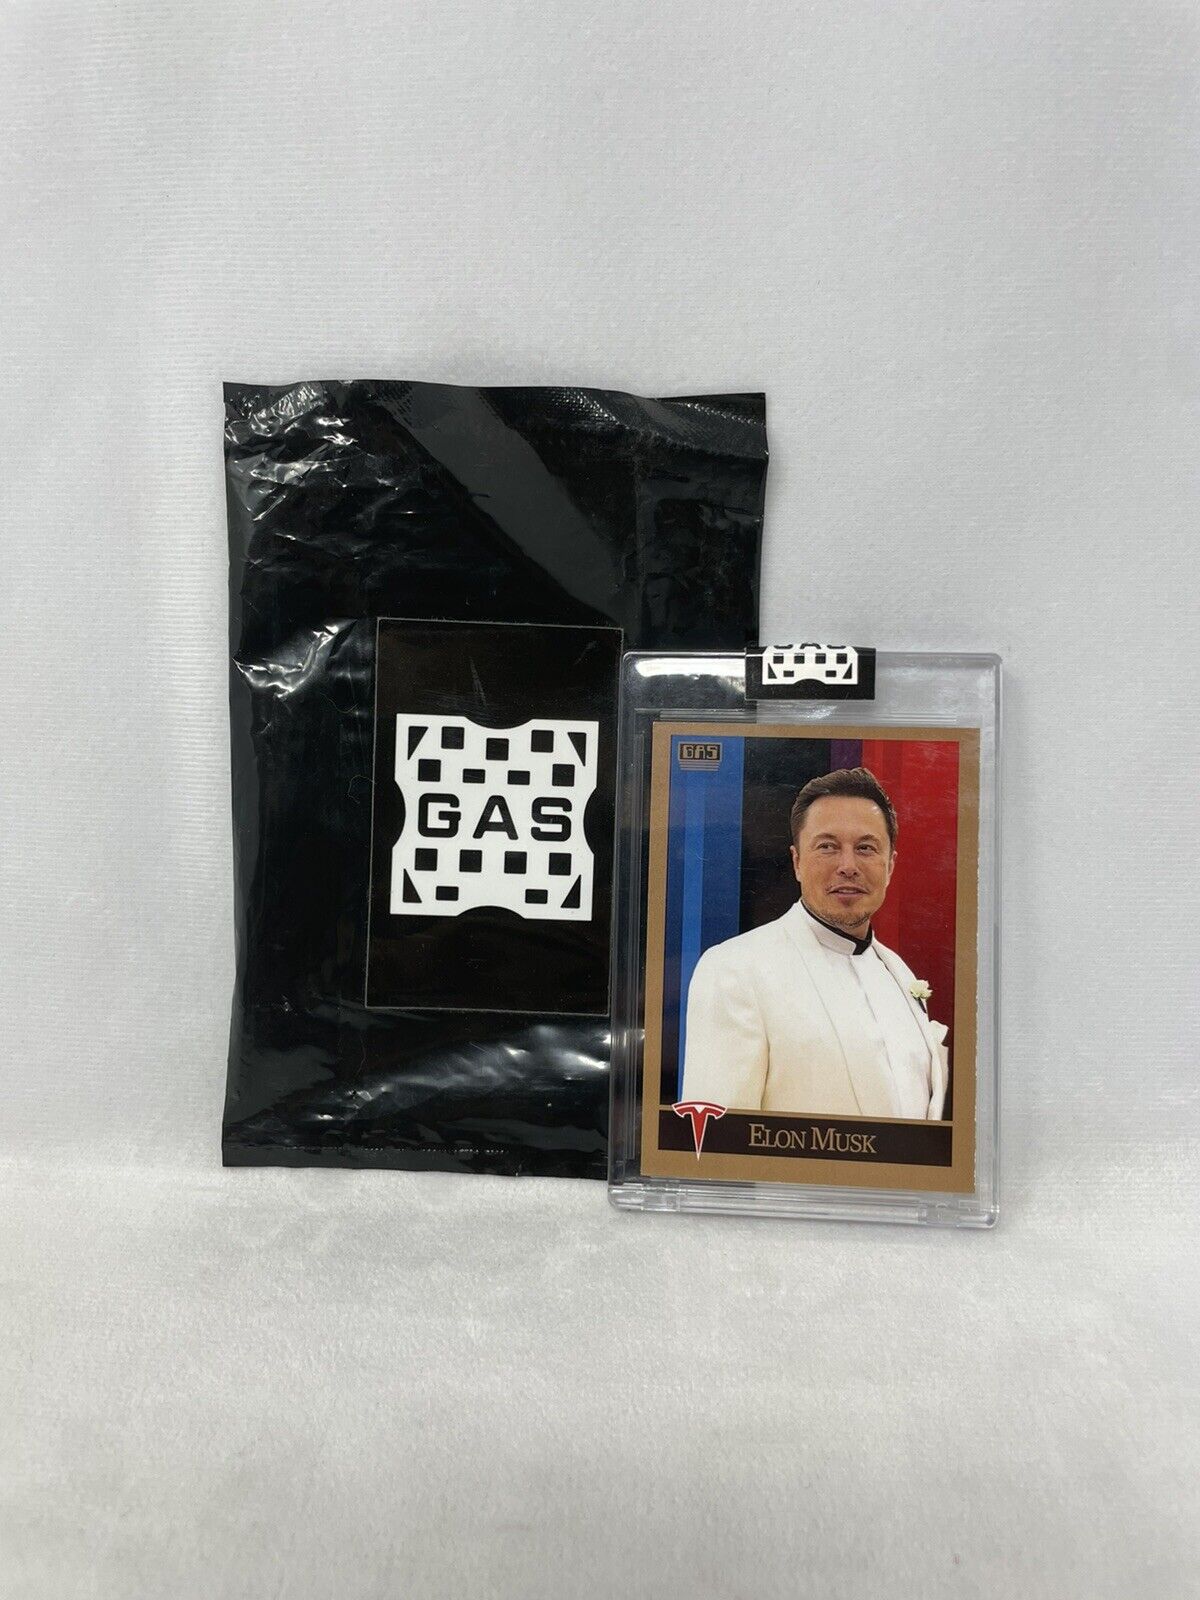 2021 G.A.S. Trading Card Elon Musk NTWRK Exclusive Rare With Original Packaging